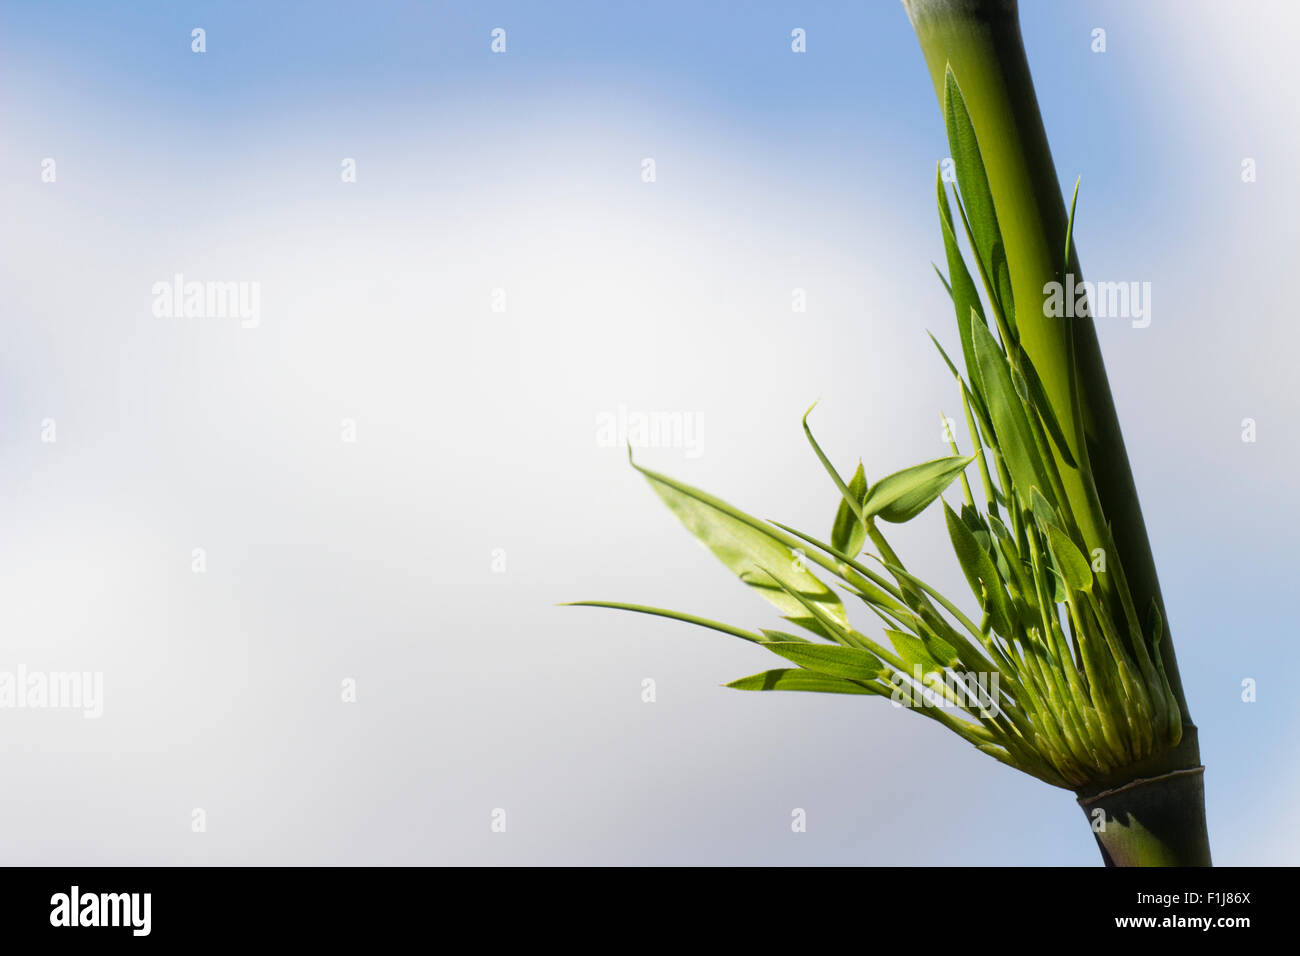 Opening foliage tuft of the Foxtail bamboo, Chusquea culeou, against a blue and clouded sky Stock Photo